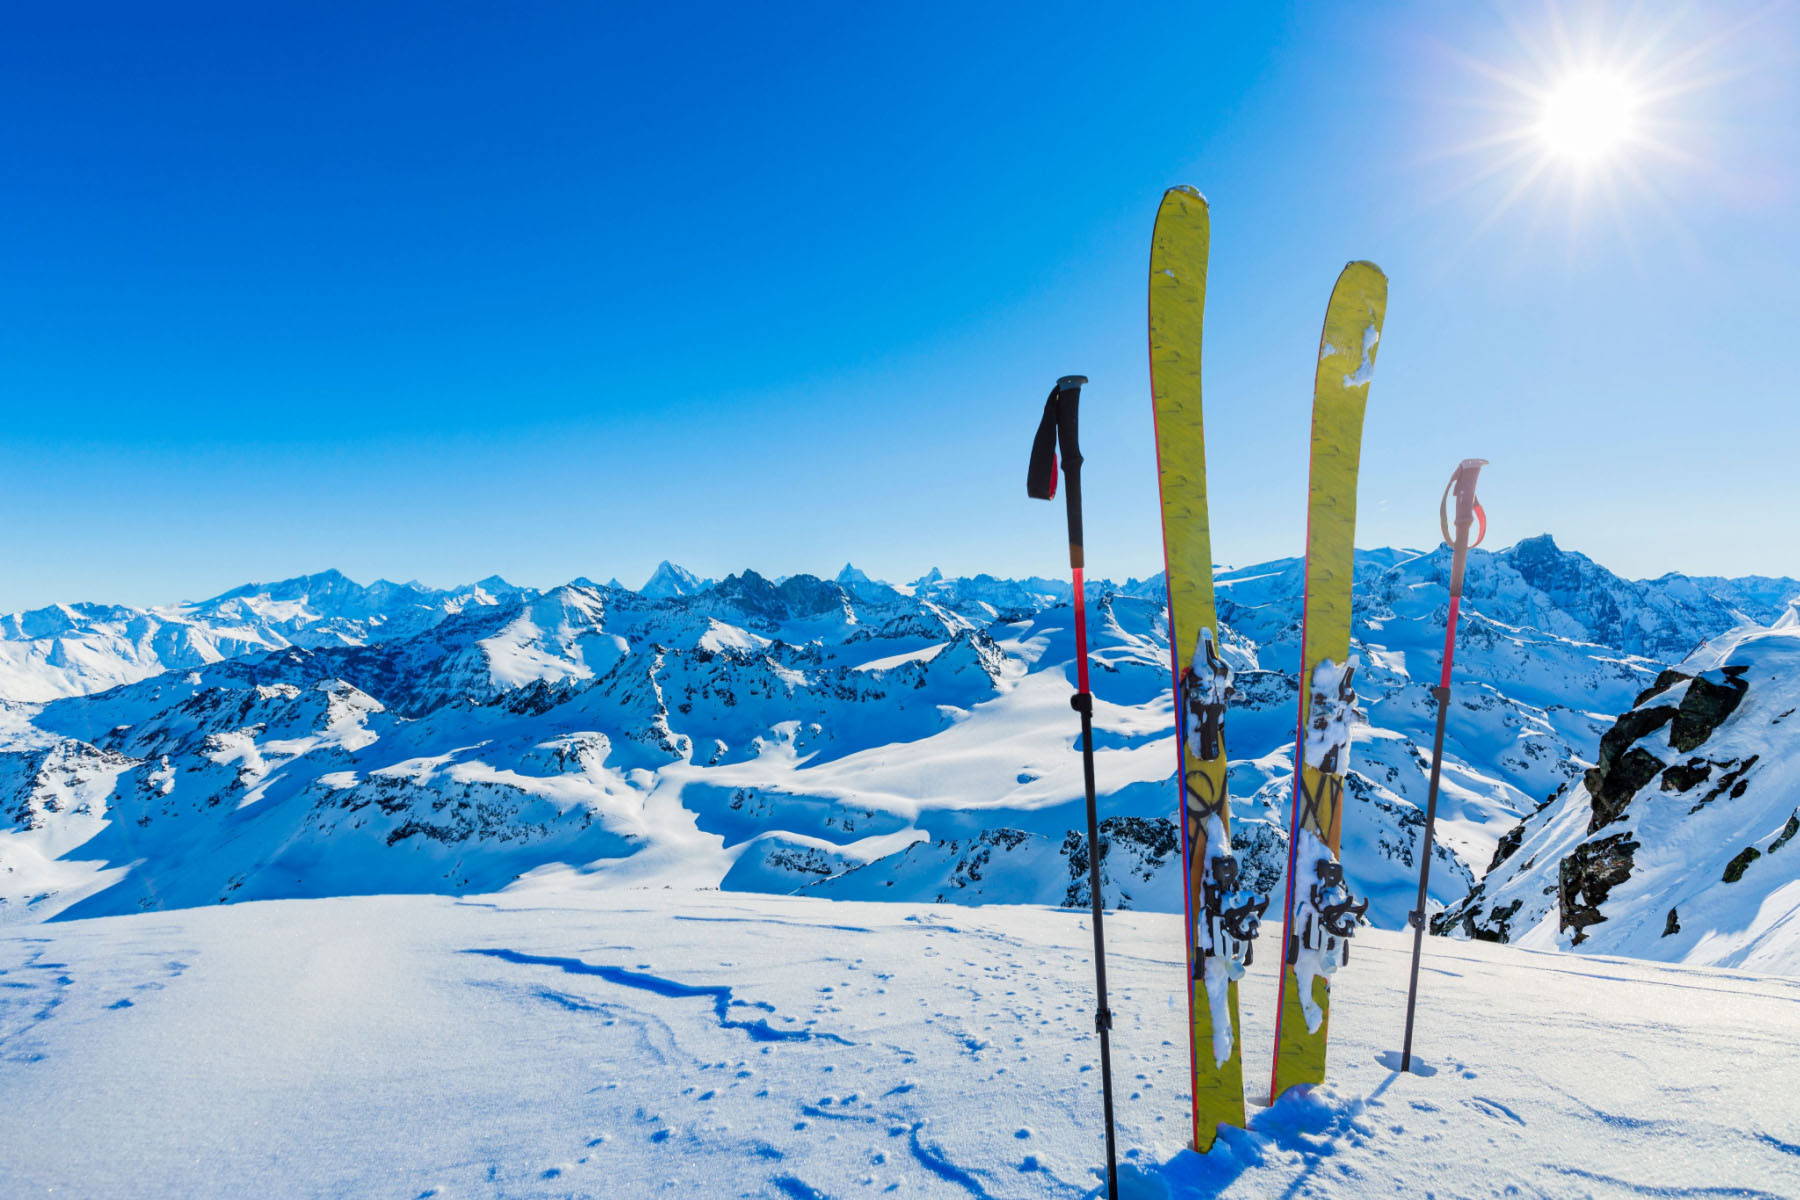 Ski touring gear in snow with mountain peaks in a background